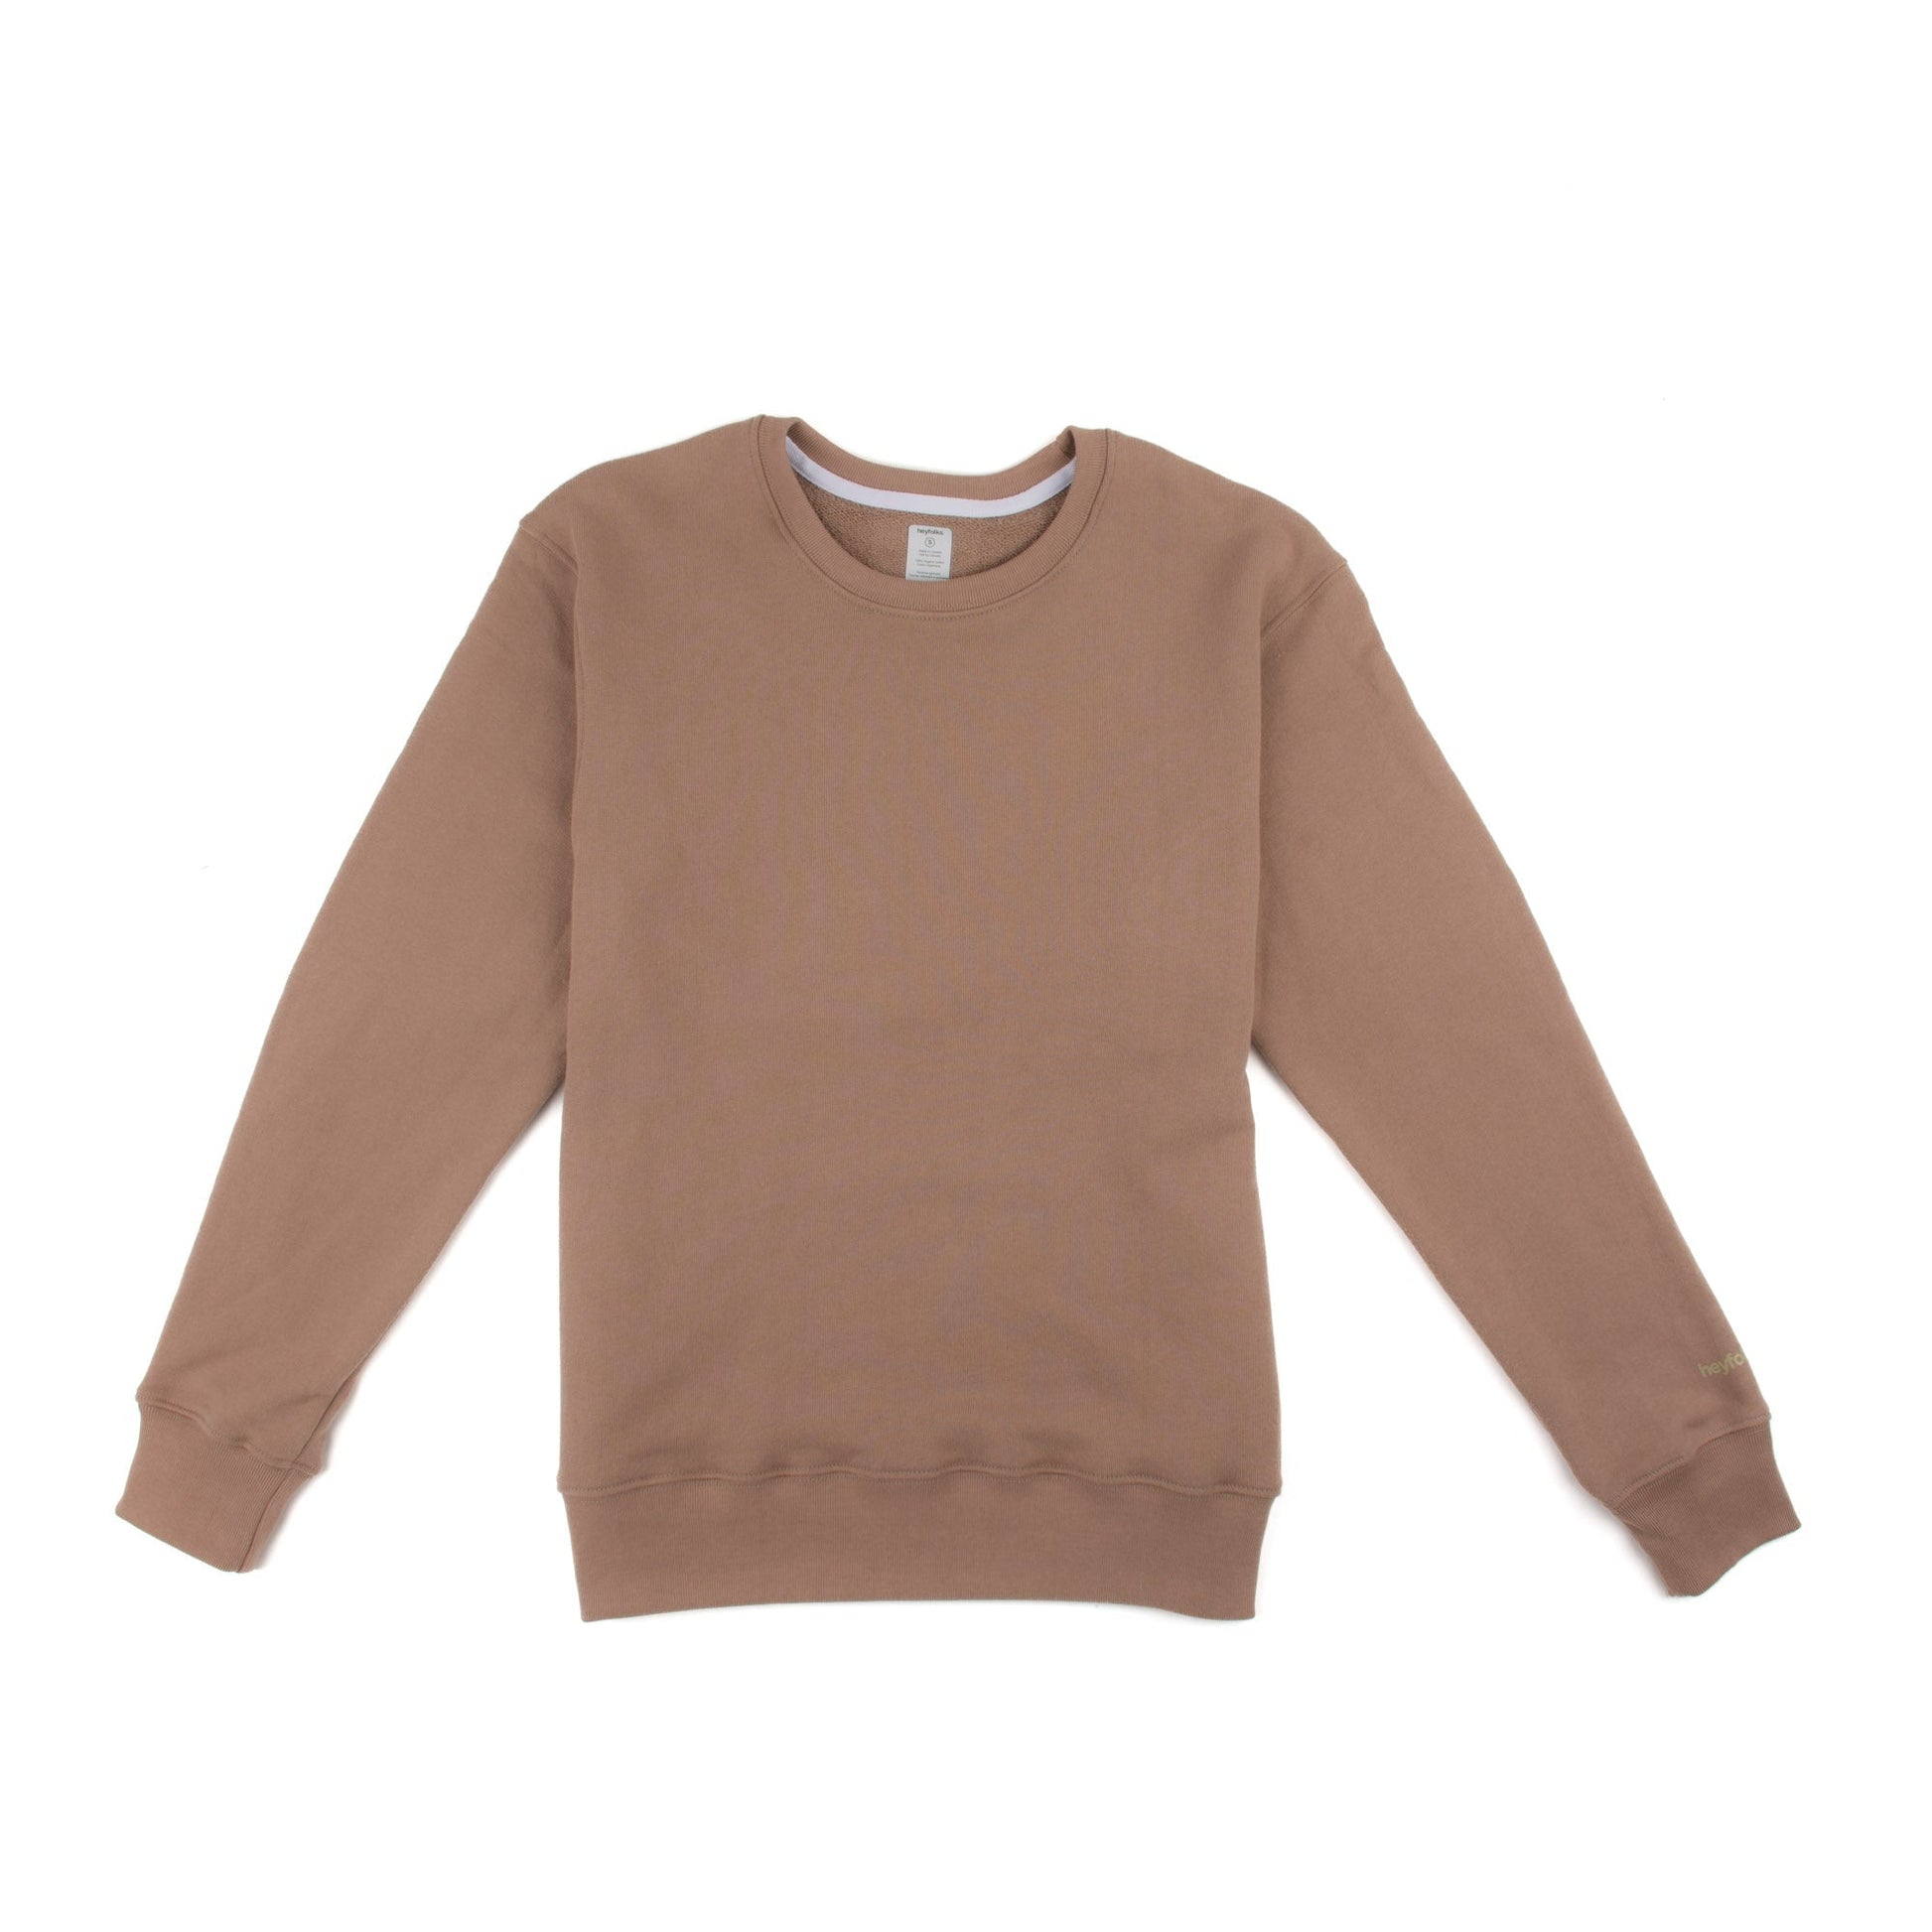 Adult Crew Neck Pullover - Basic - Fawn Adult Sweater heyfolks 